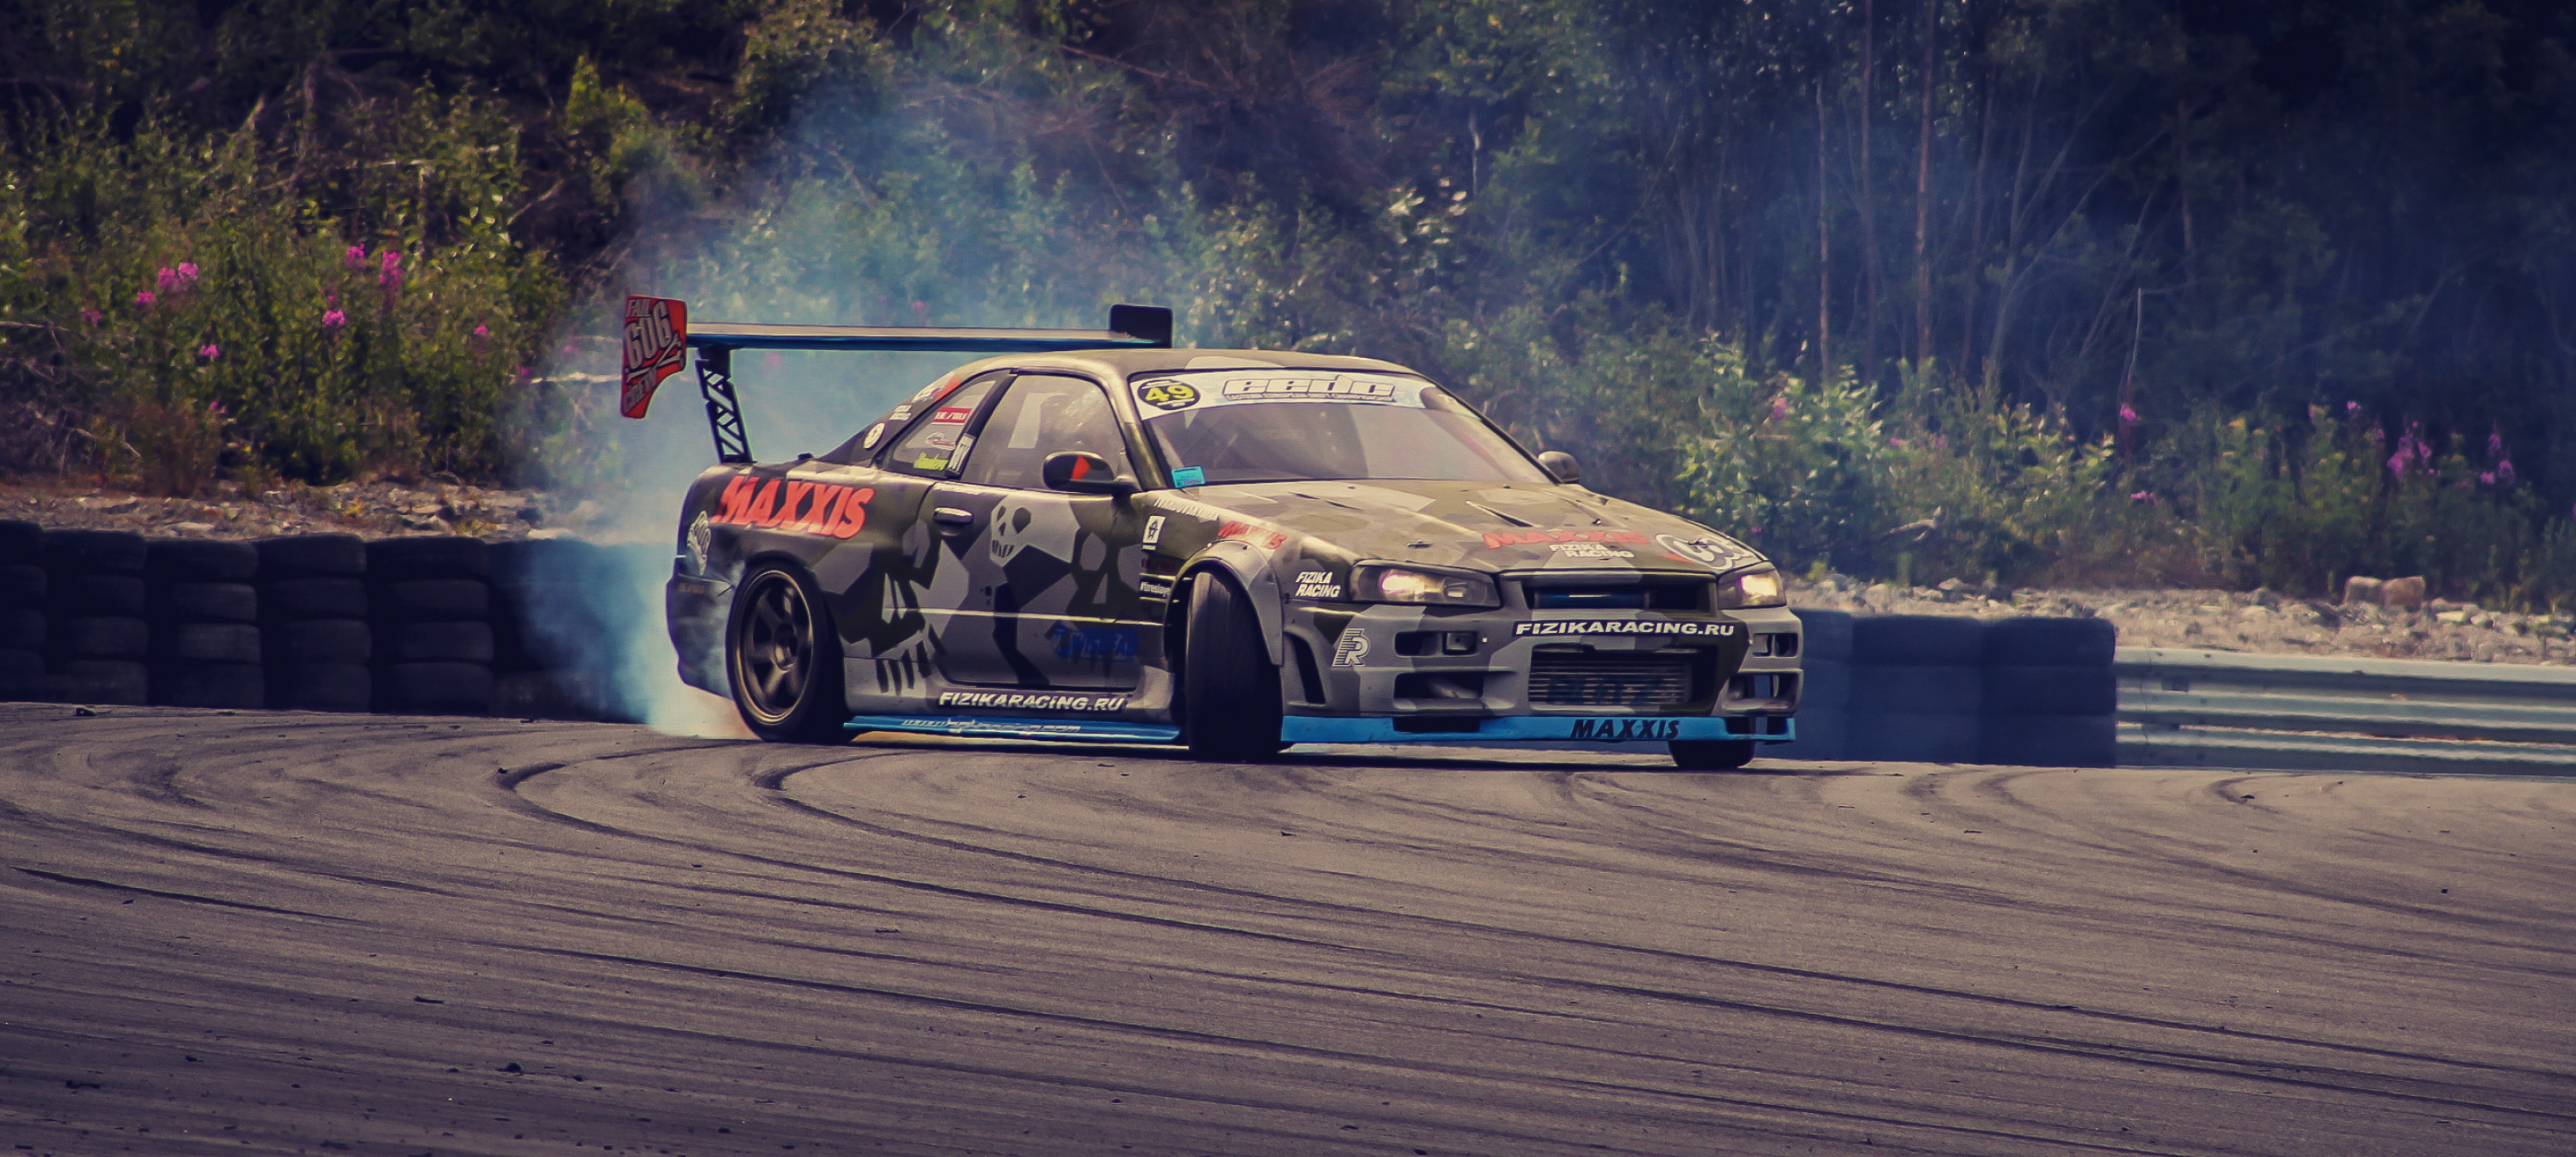 Drifting: Maxxis tires, Nissan sports car, Racing track, Competitive event. 3460x1560 Dual Screen Wallpaper.